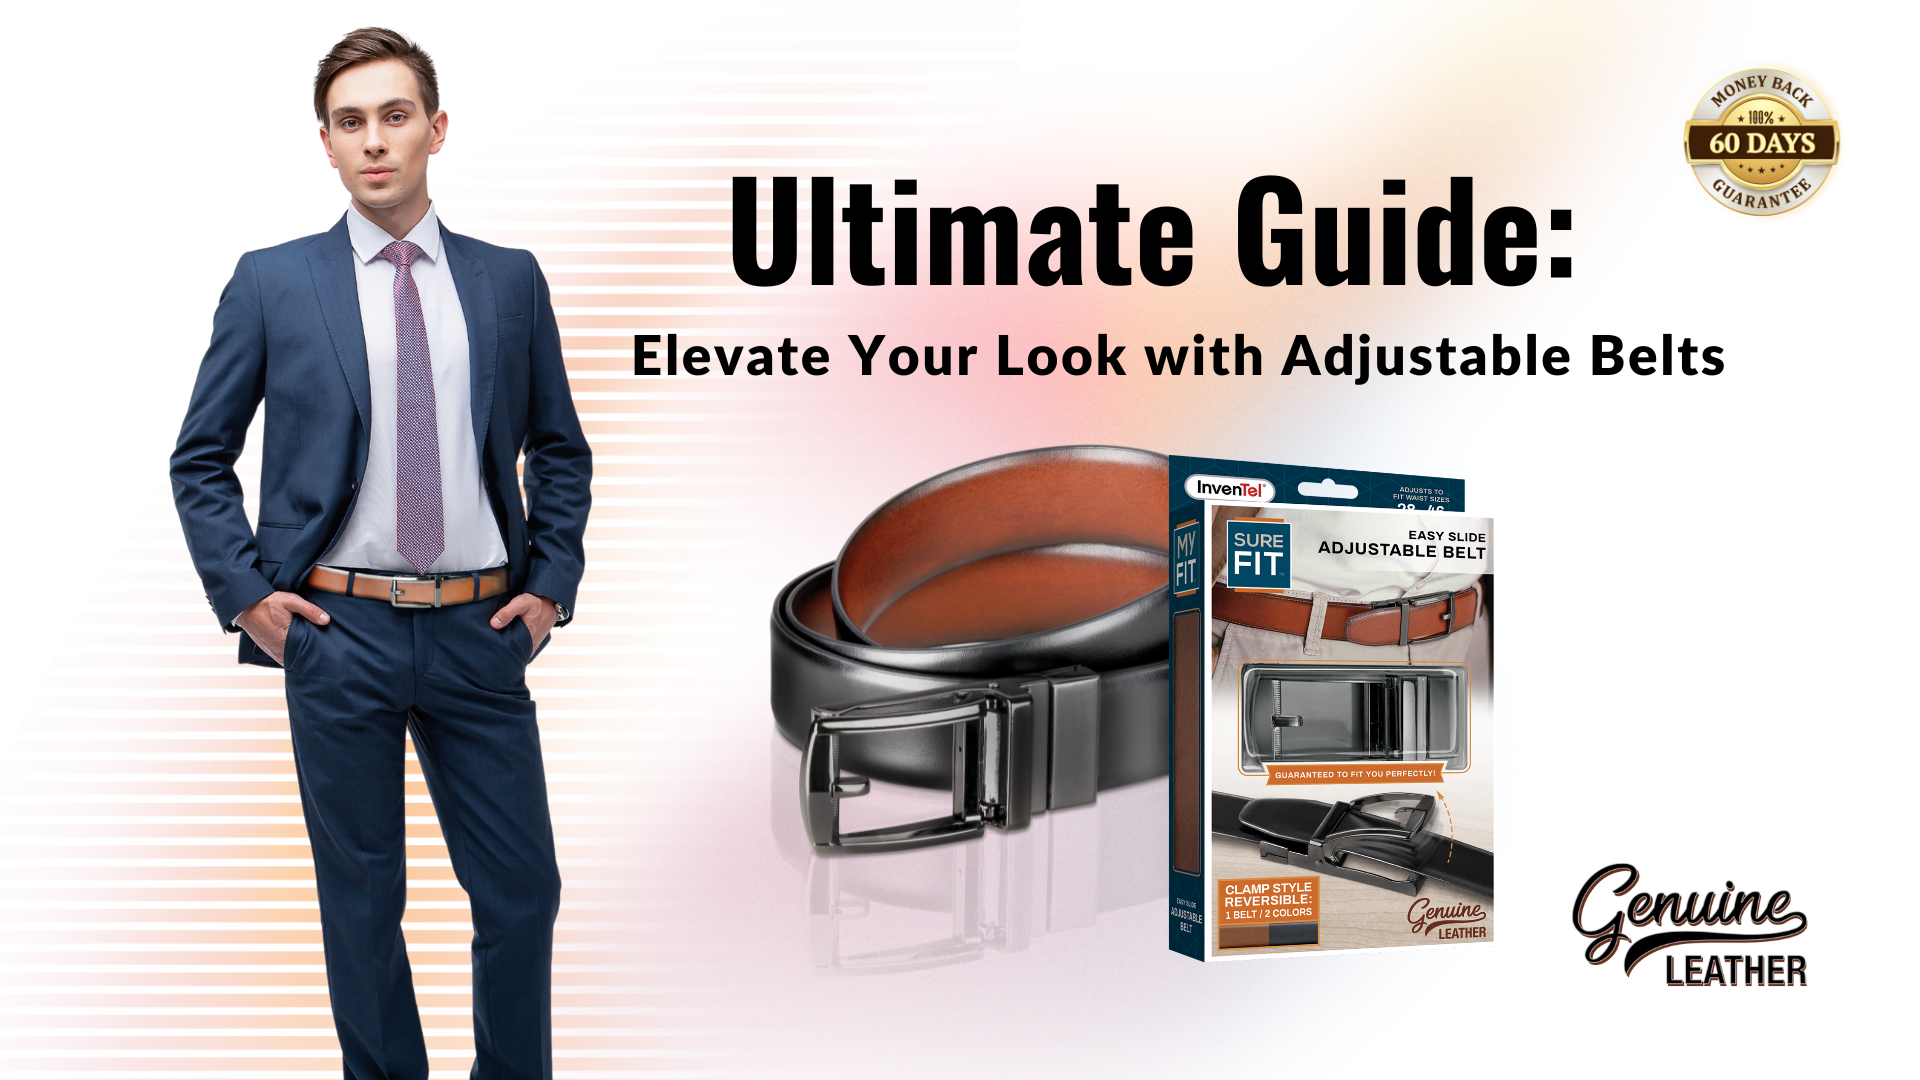 Ultimate Guide: Elevate Your Look with Adjustable Belts